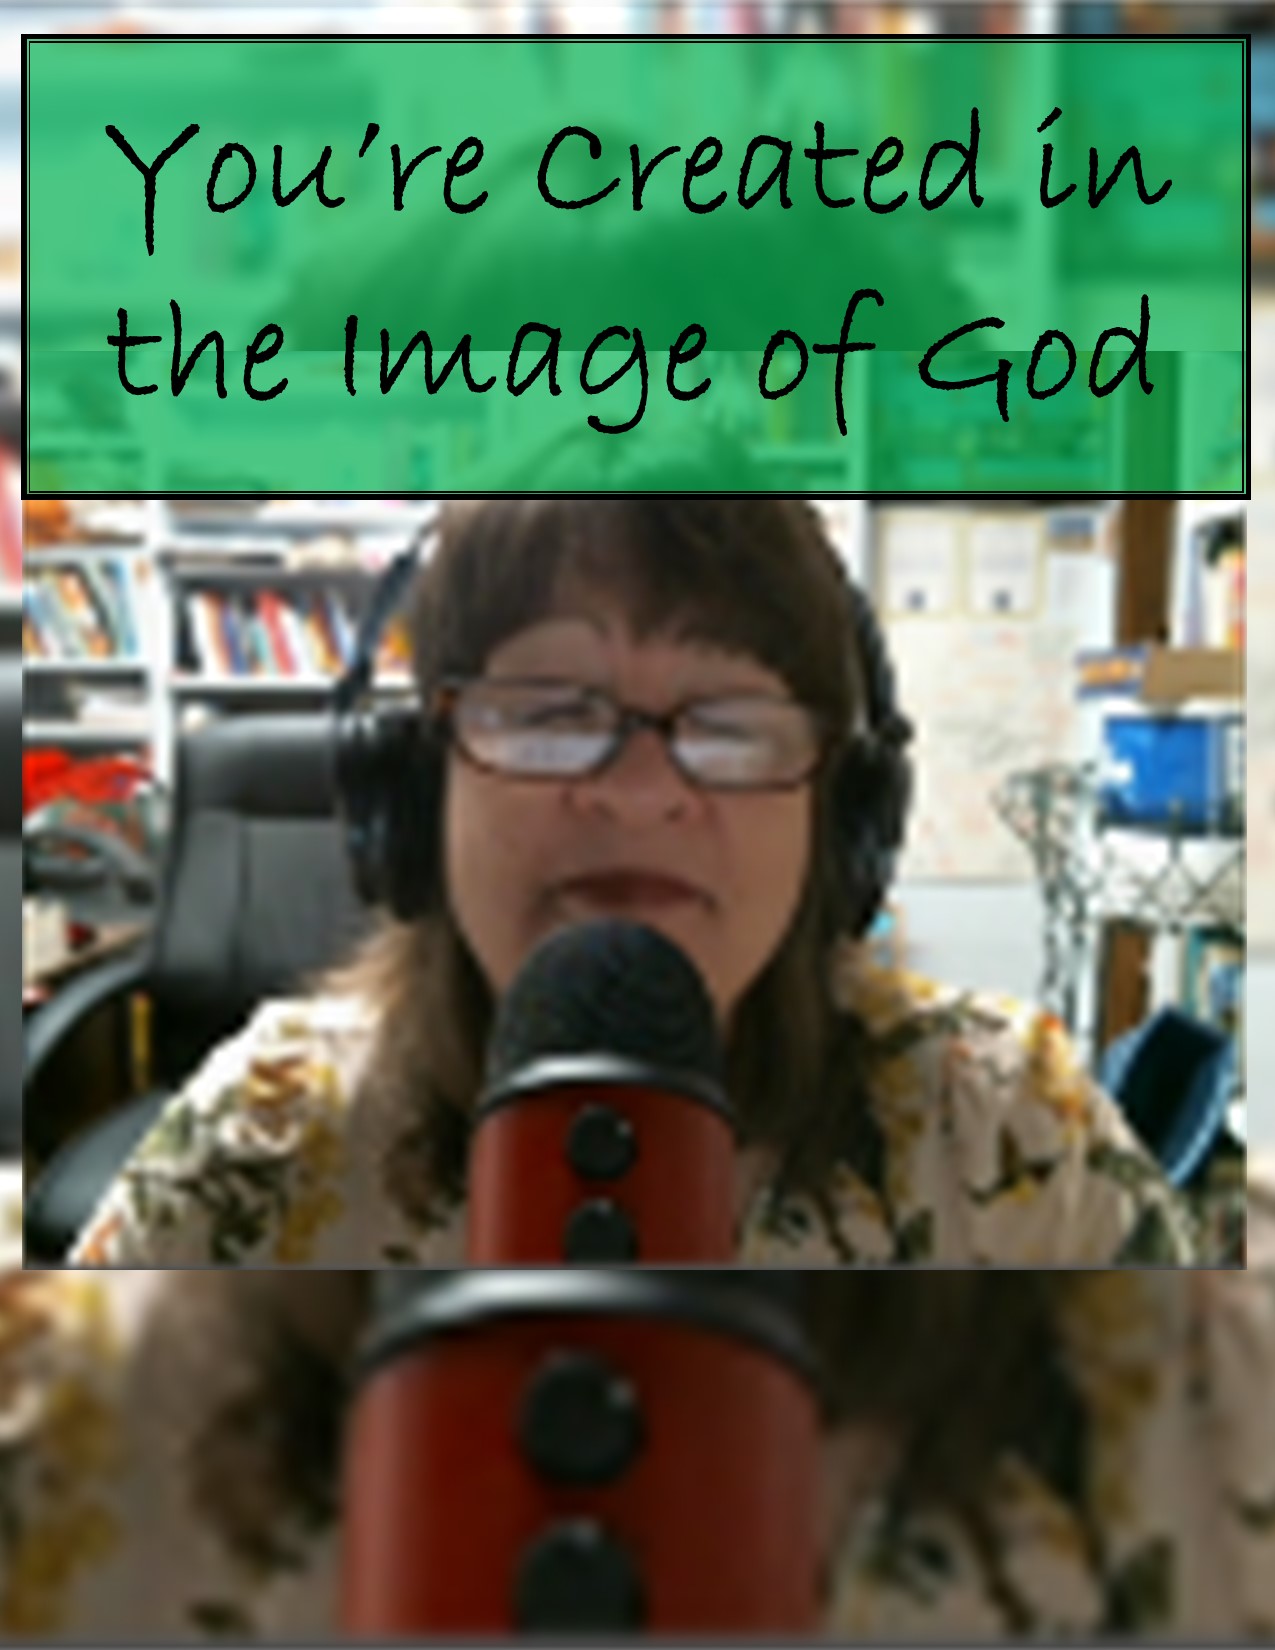 You’re Created in the Image of God (thank you, Bee Gees!)